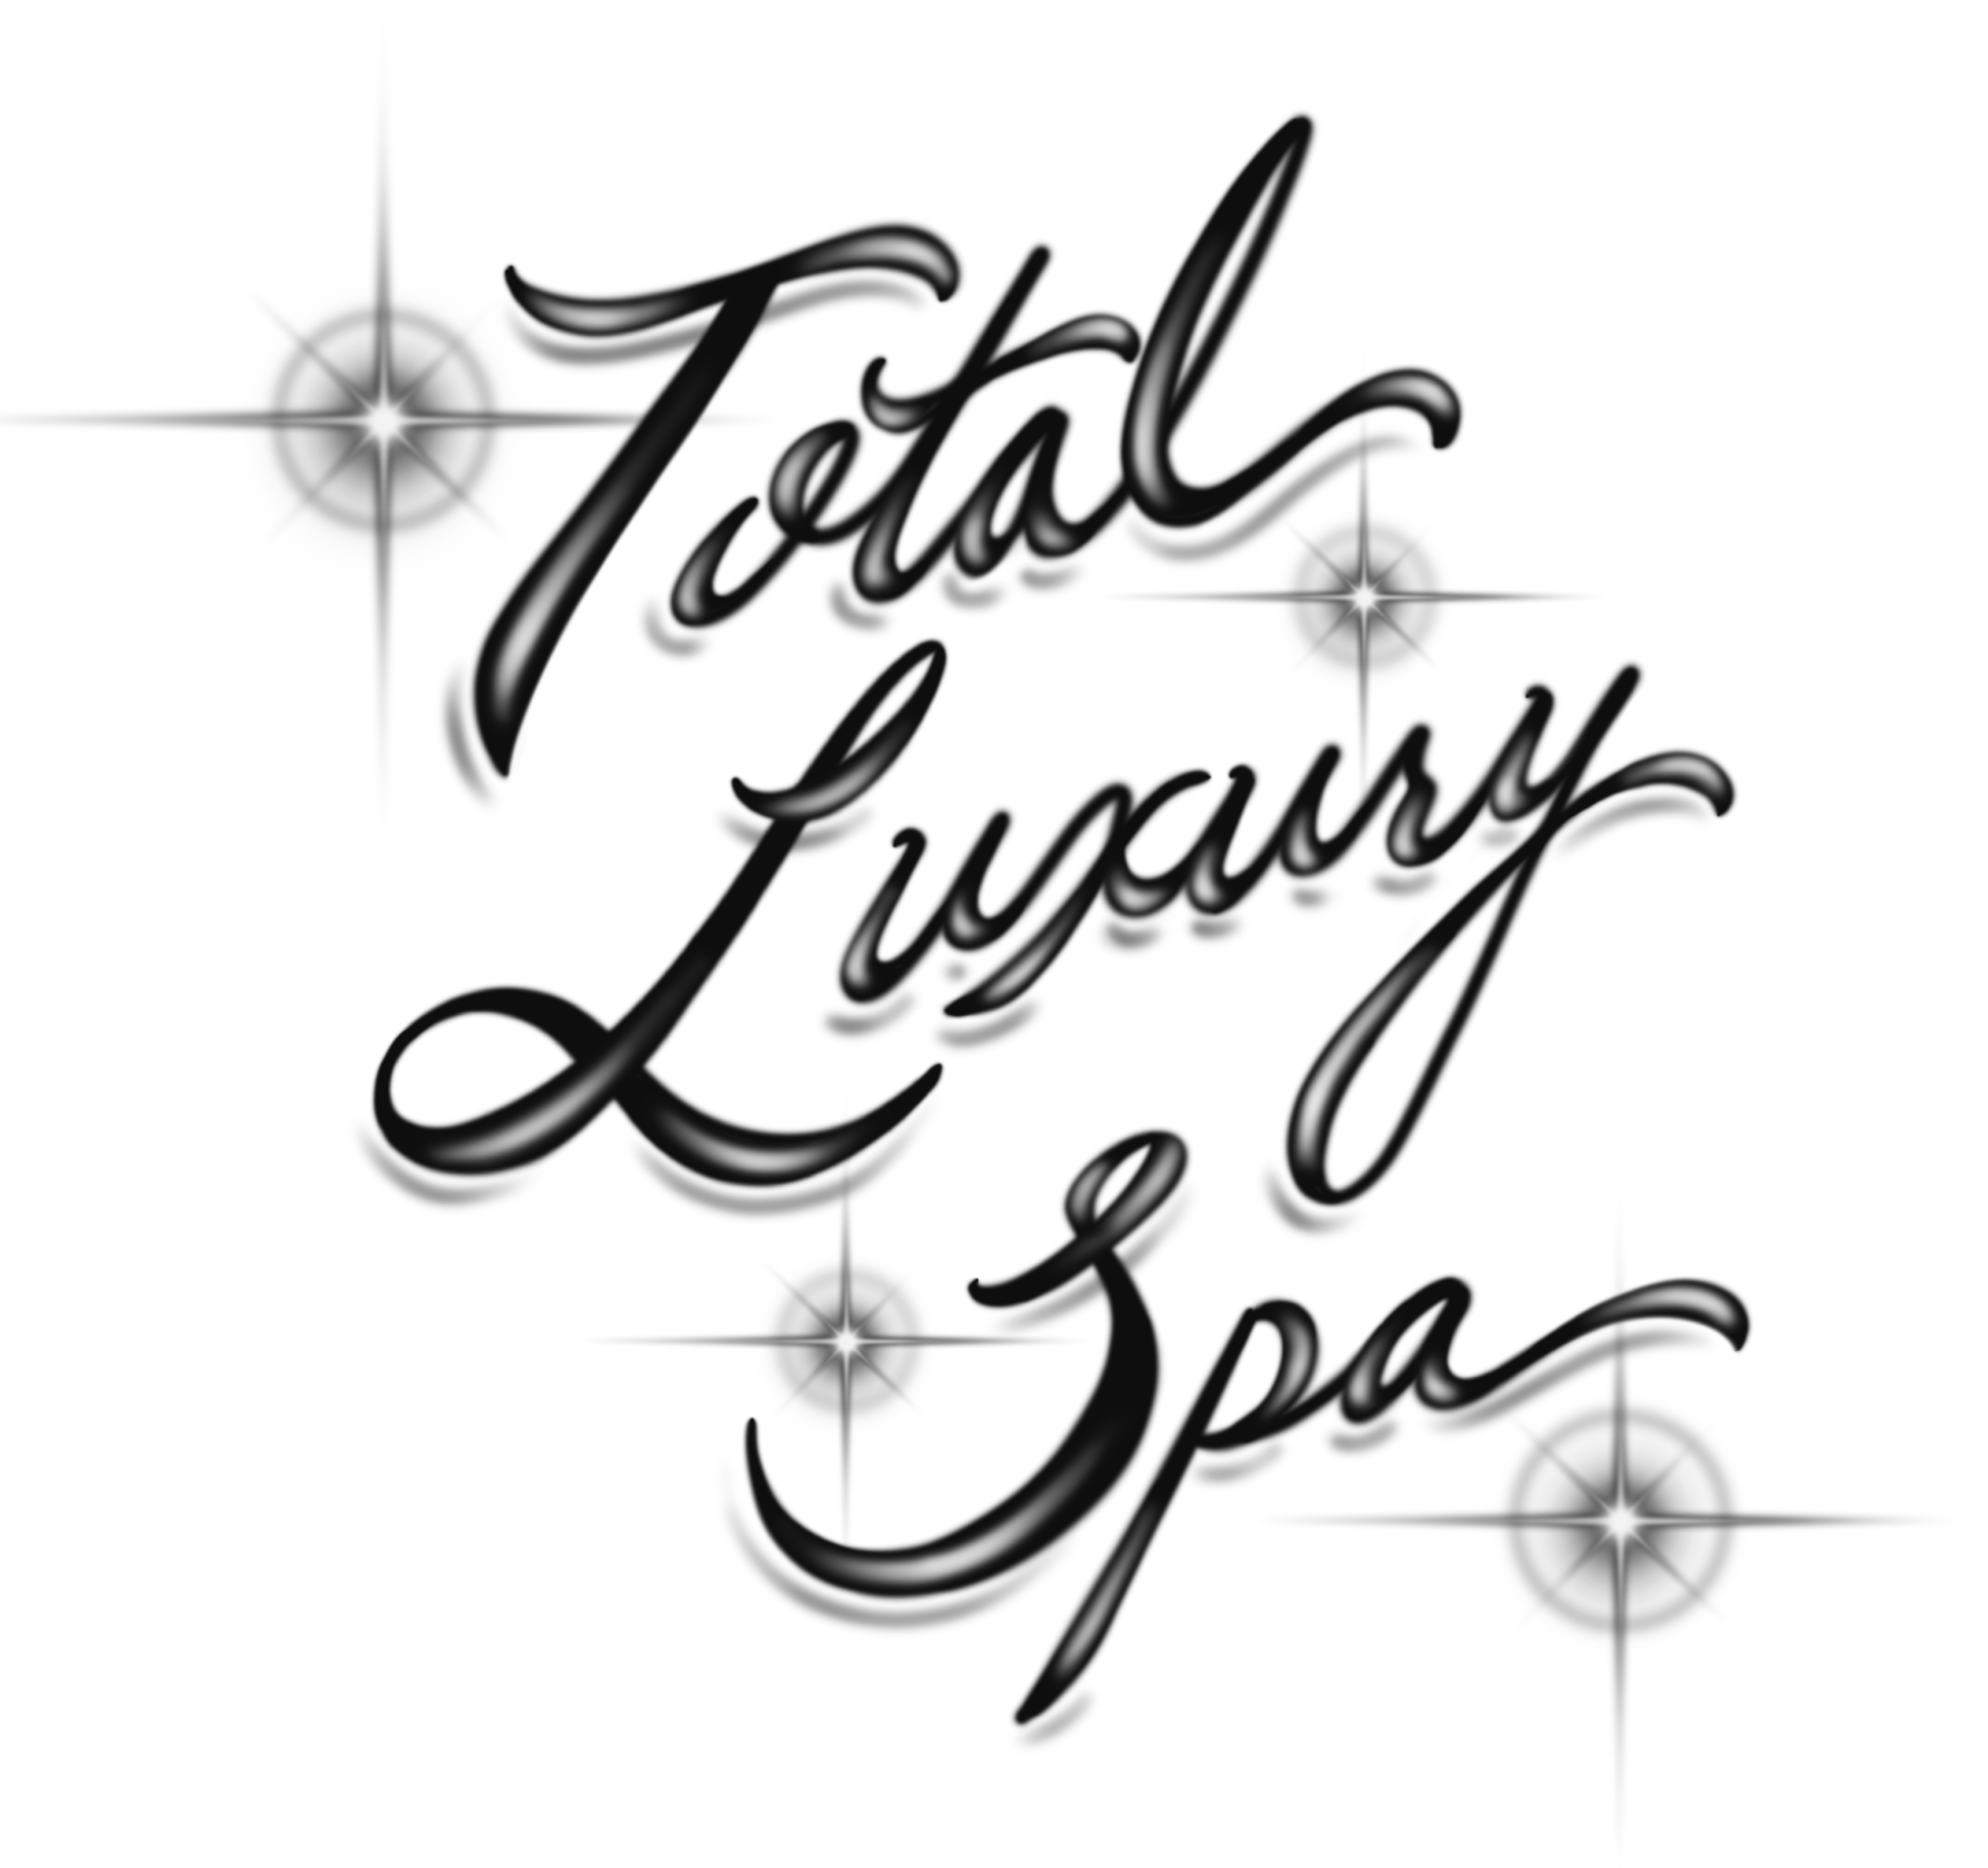 script that reads “Total Luxury Spa” surrounded by flare graphics